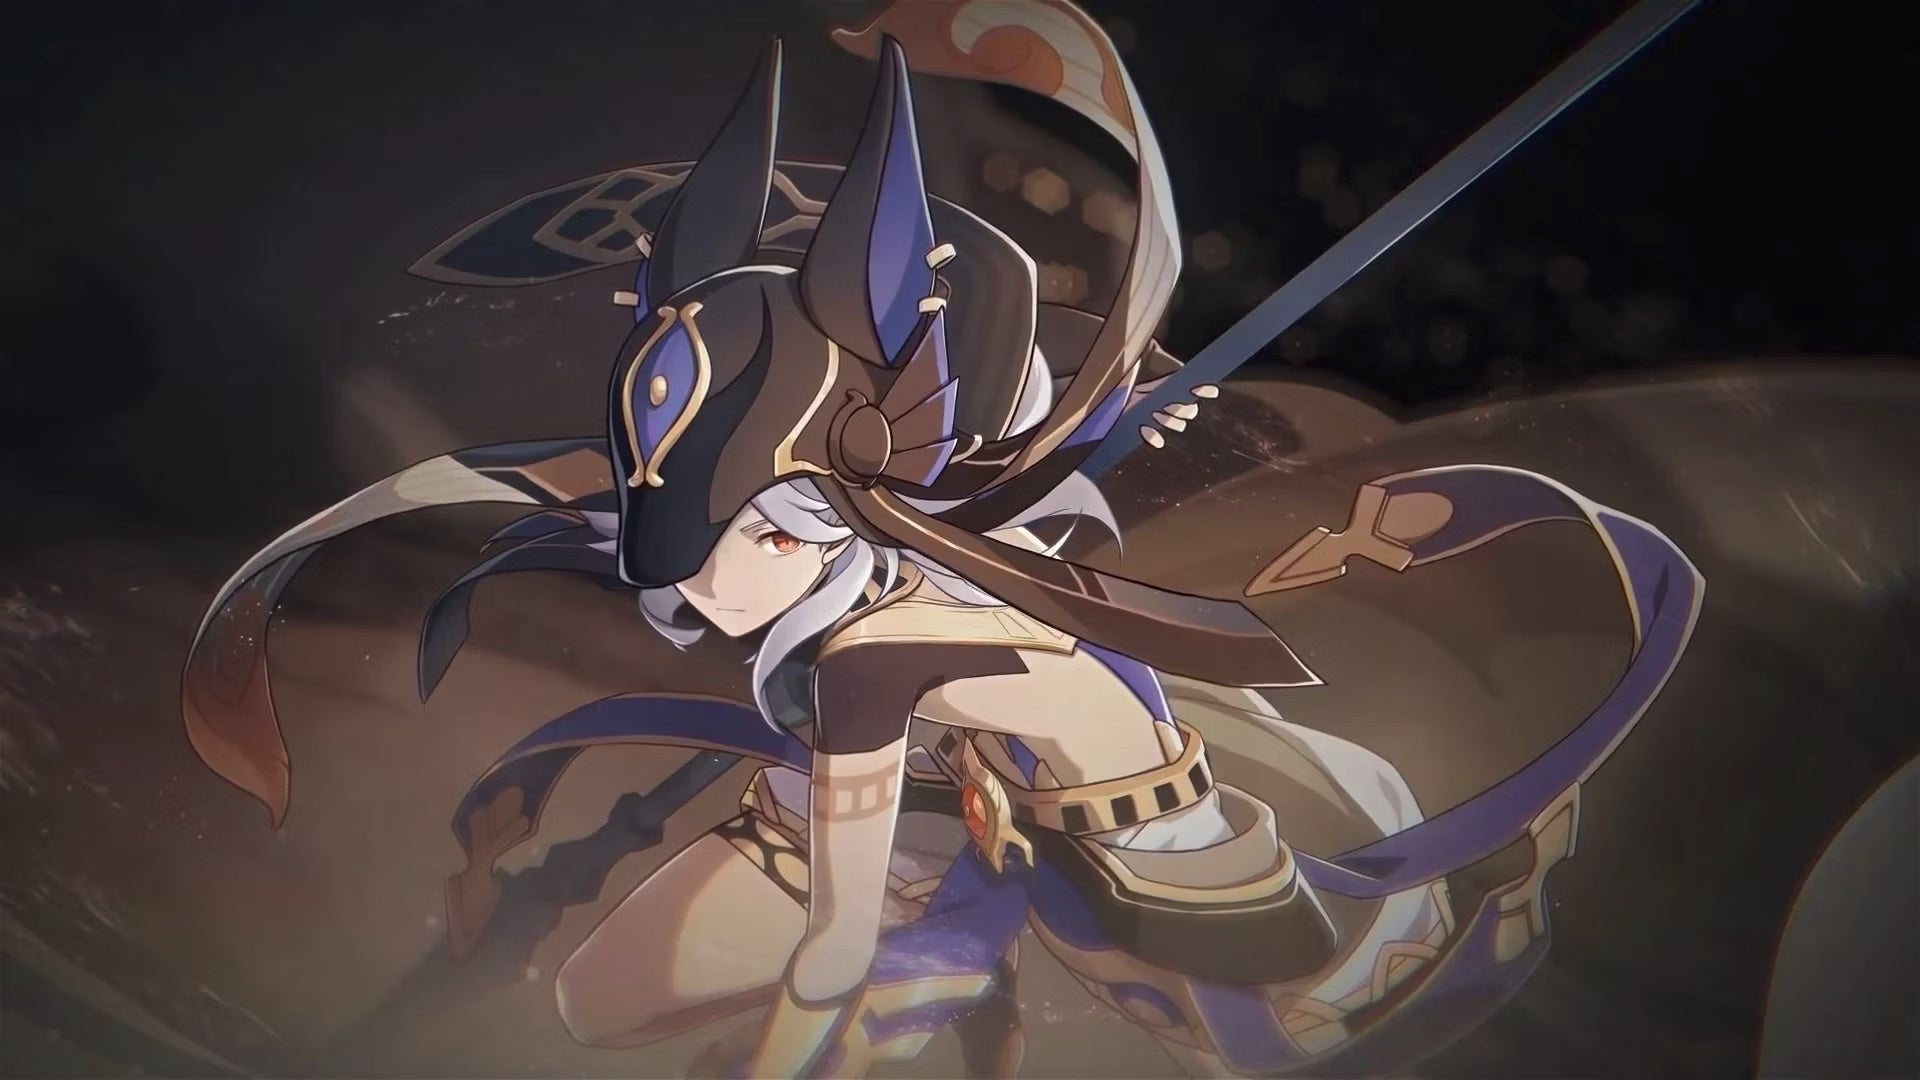 Genshin Impact Cyno build: A young man with a wolf hat is swinging a spear against a shadowy background